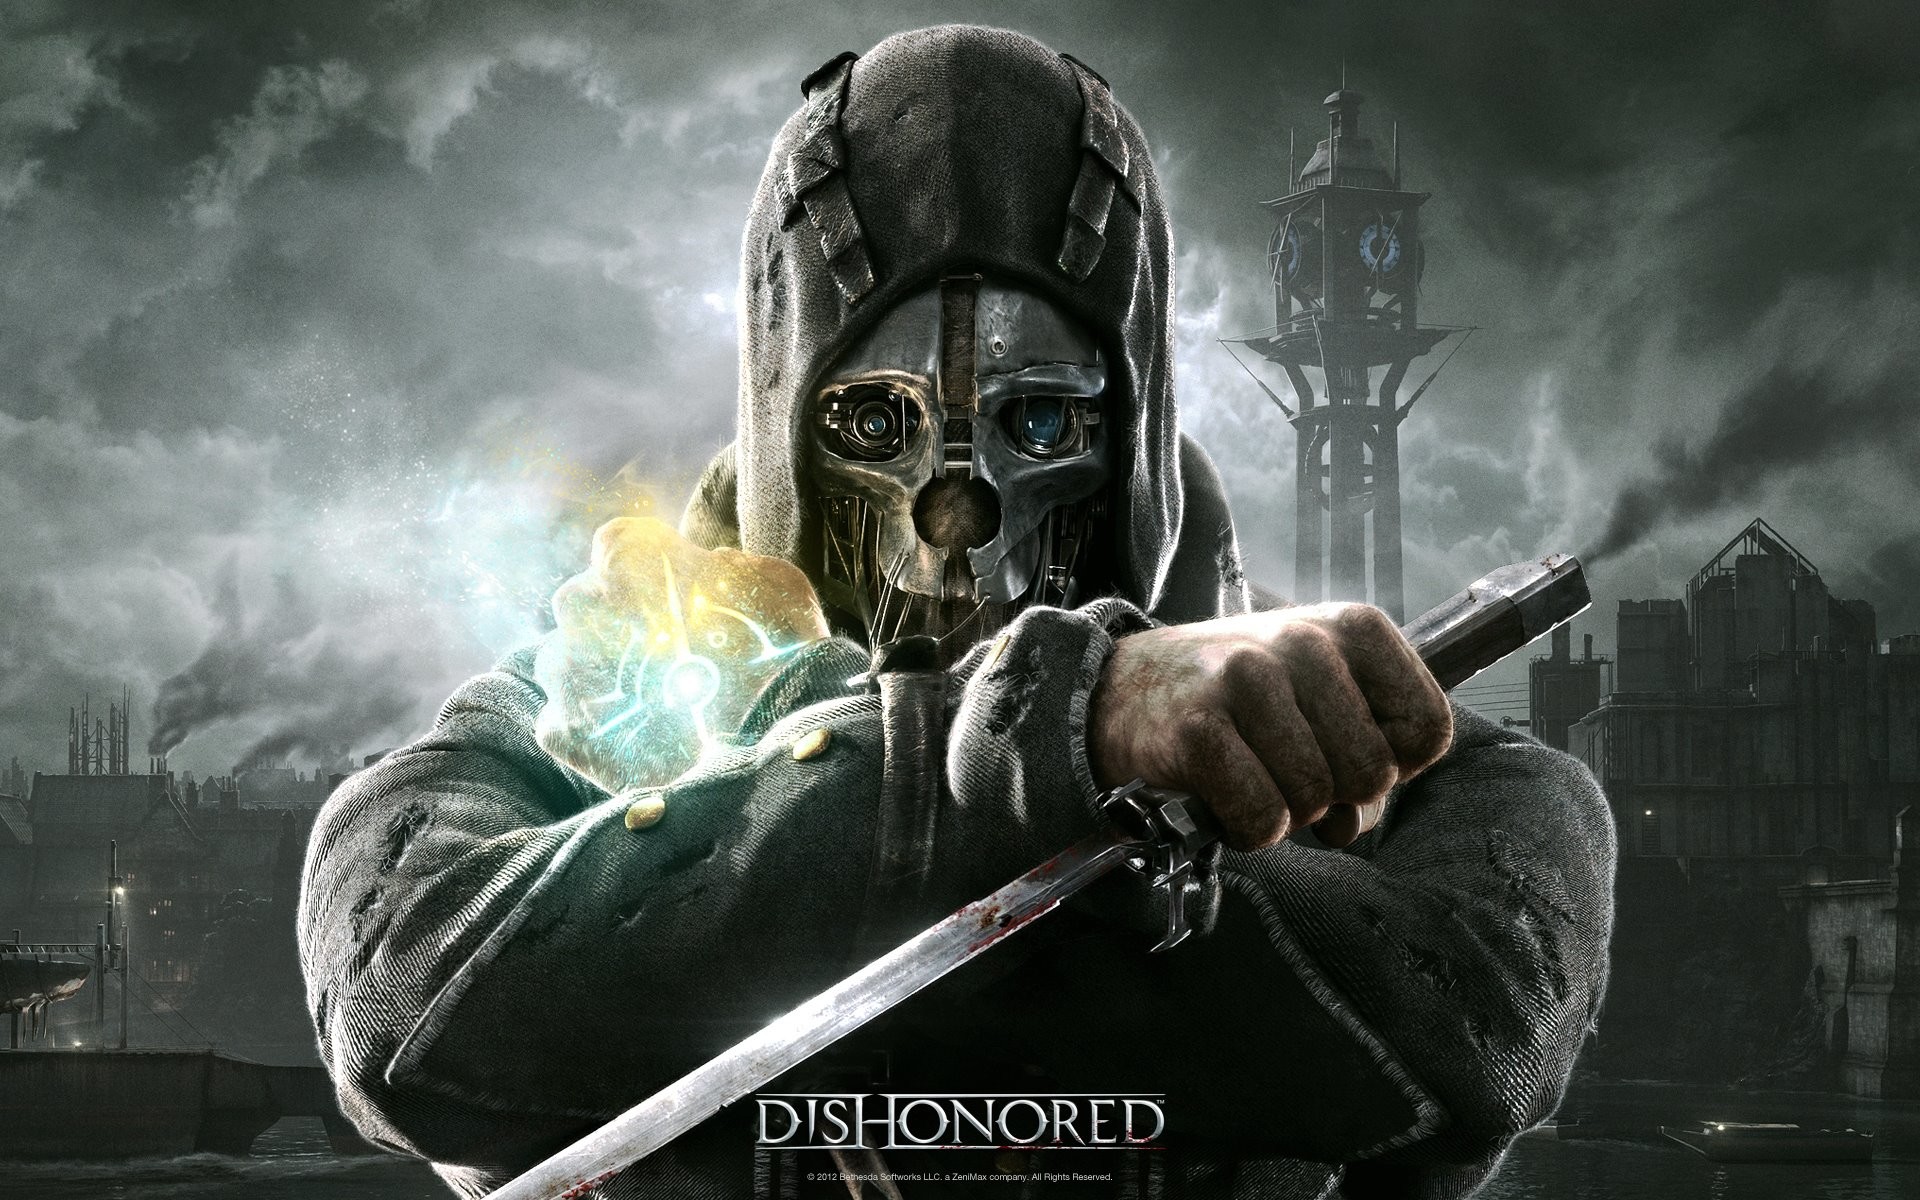 VGA12: Dishonored Wins Best Action Adventure Game